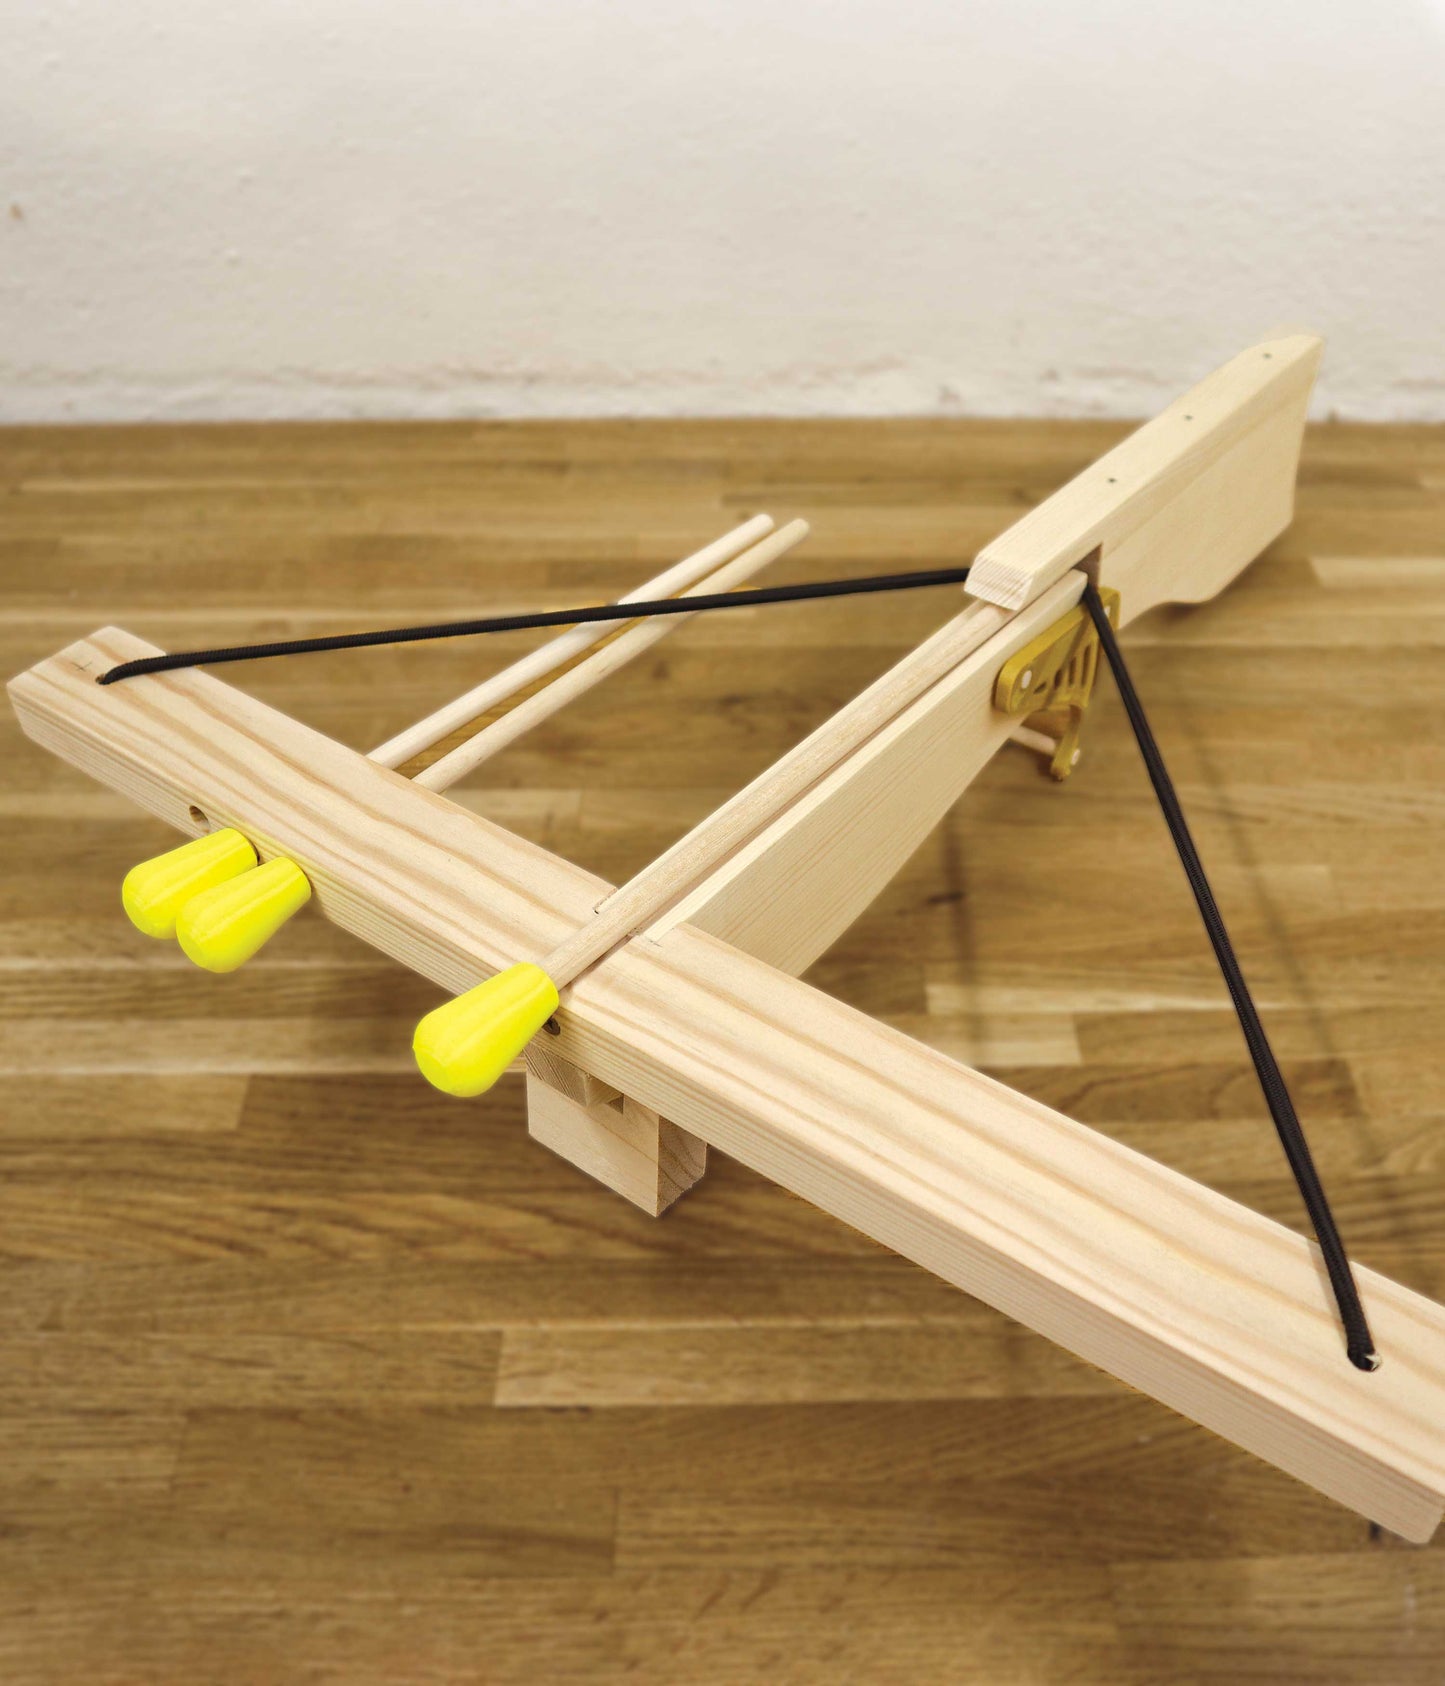 Make a Toy Crossbow